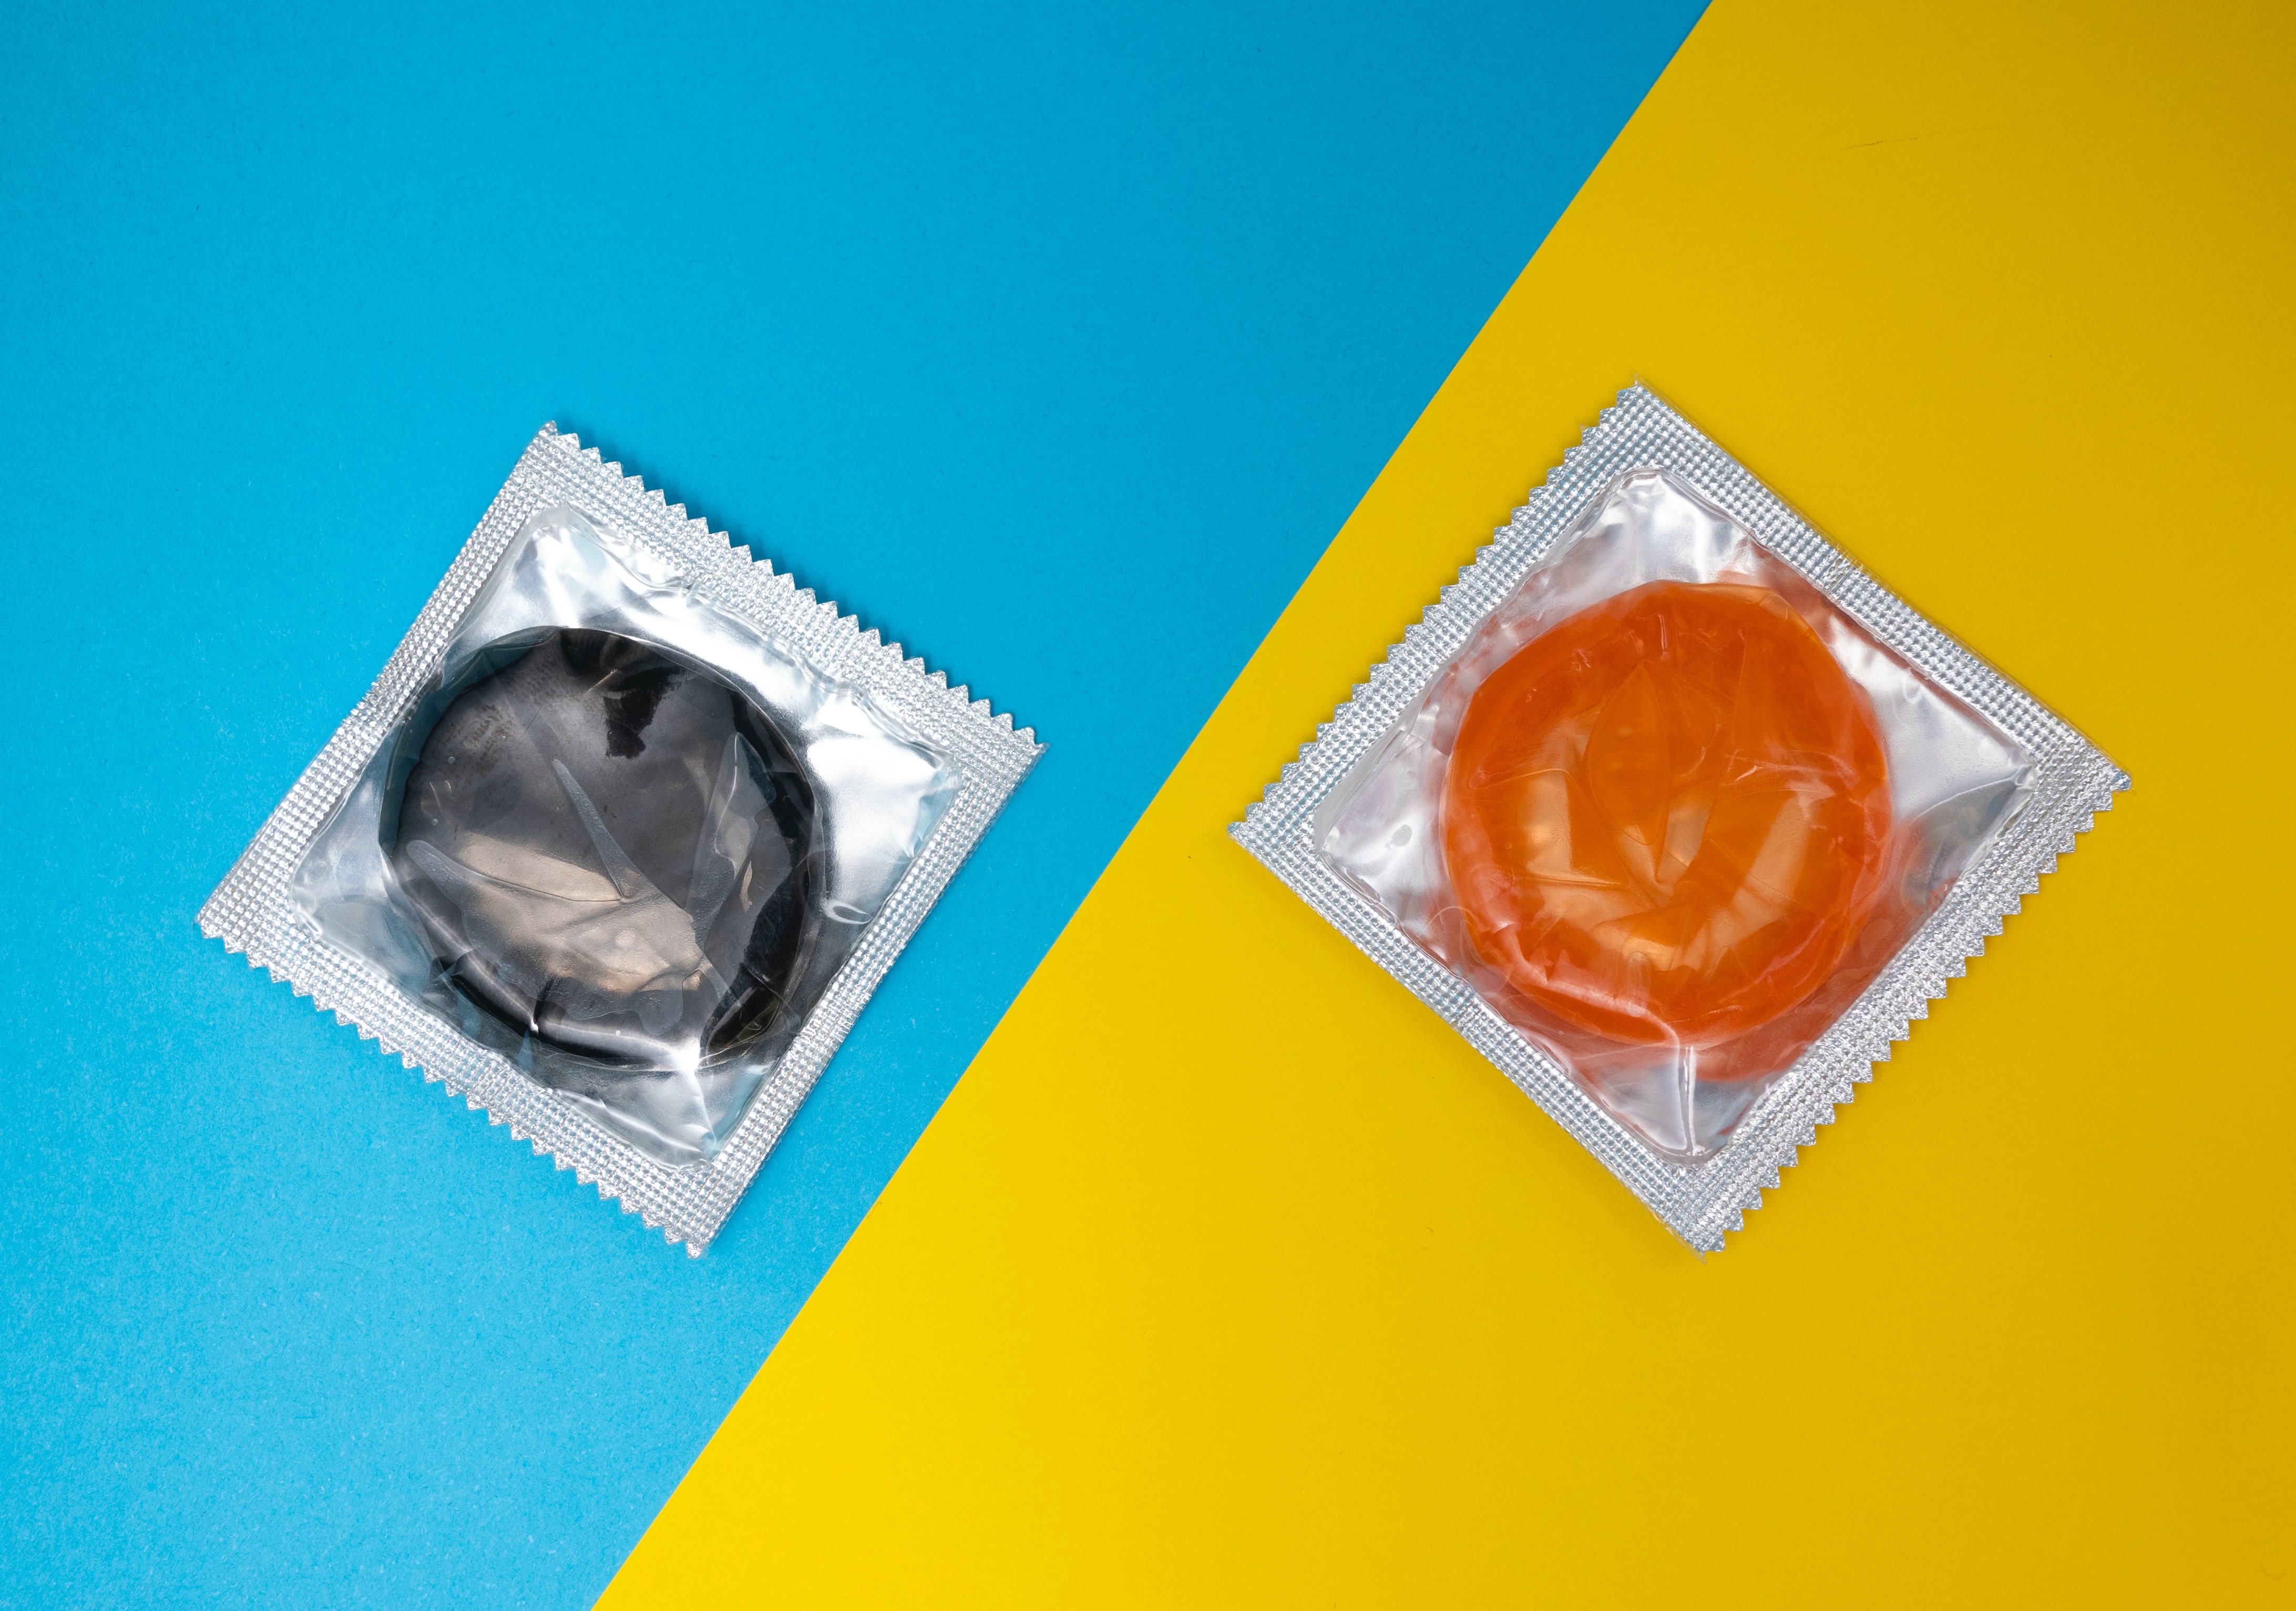 Two condoms on a blue-yellow background- Photo by Reproductive Health Supplies Coalition on Unsplash